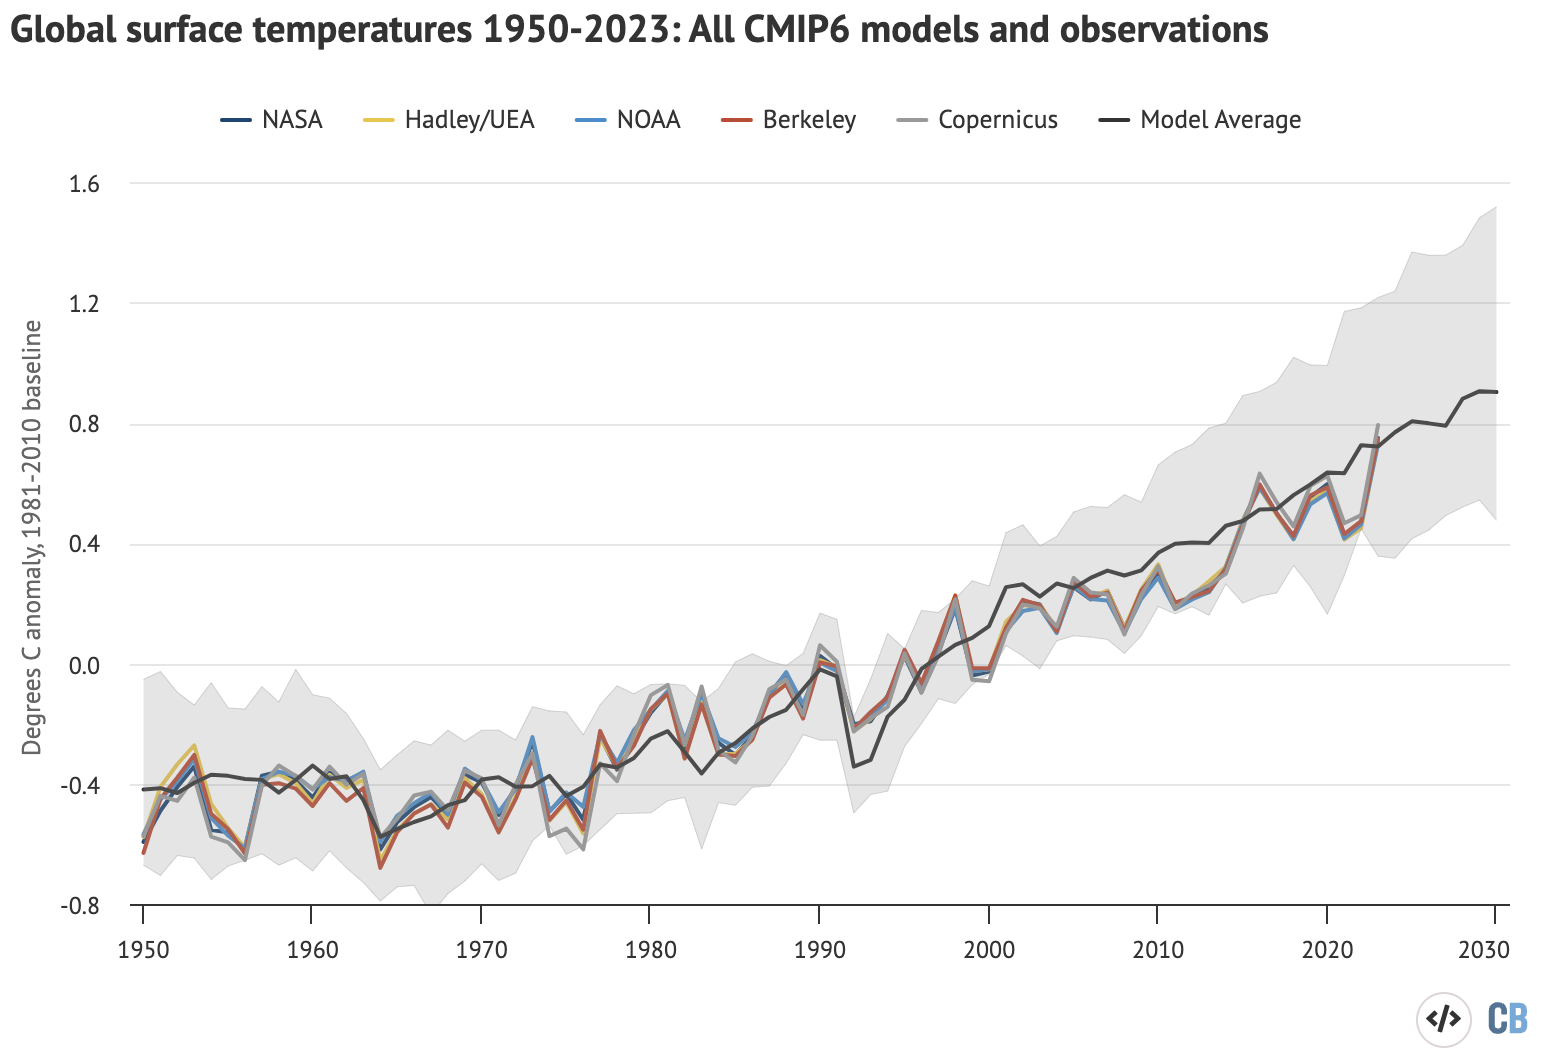 Annual global average surface temperatures from CMIP6 models and observations between 1950 and 2030 (through 2023 for observations). Models use the SSP2-4.5 scenario after 2015. Anomalies plotted with respect to a 1981-2010 baseline. Chart by Carbon Brief.